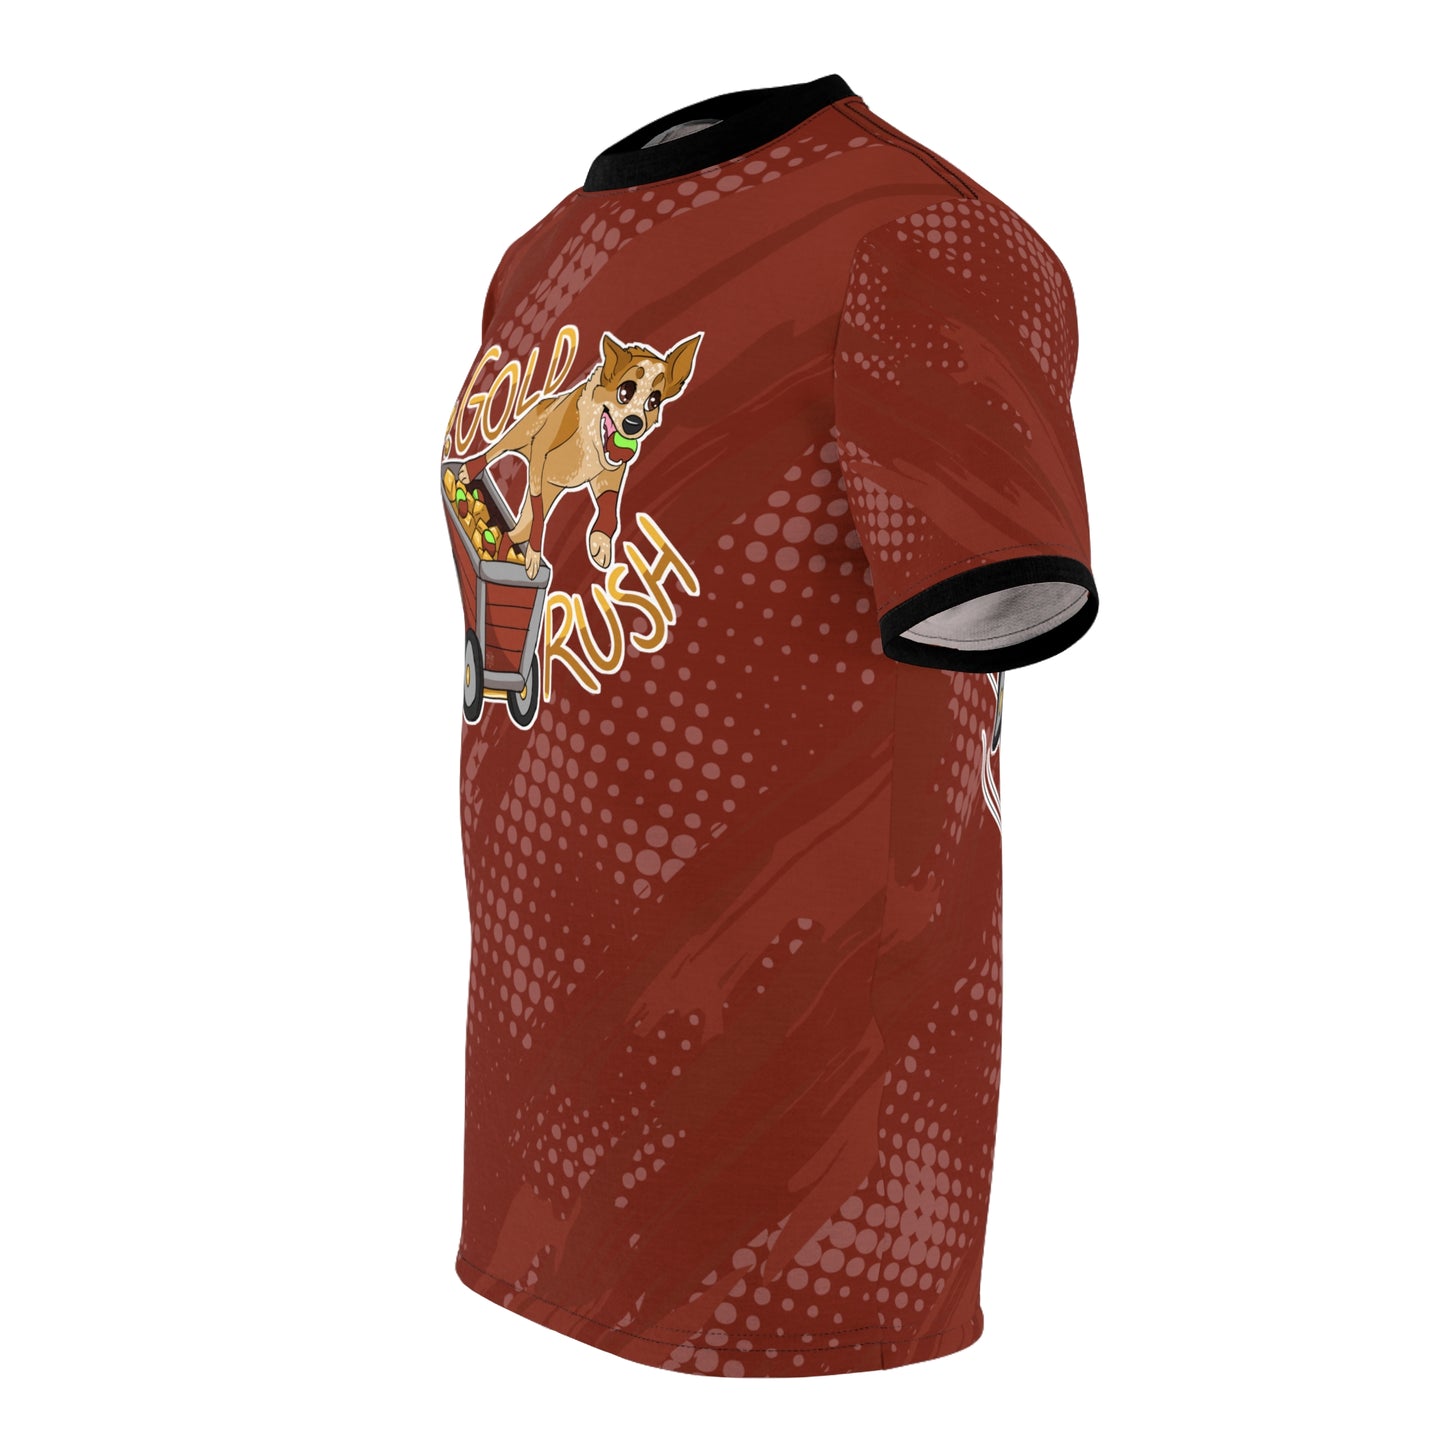 GOLD RUSH FLYBALL Unisex JERSEY